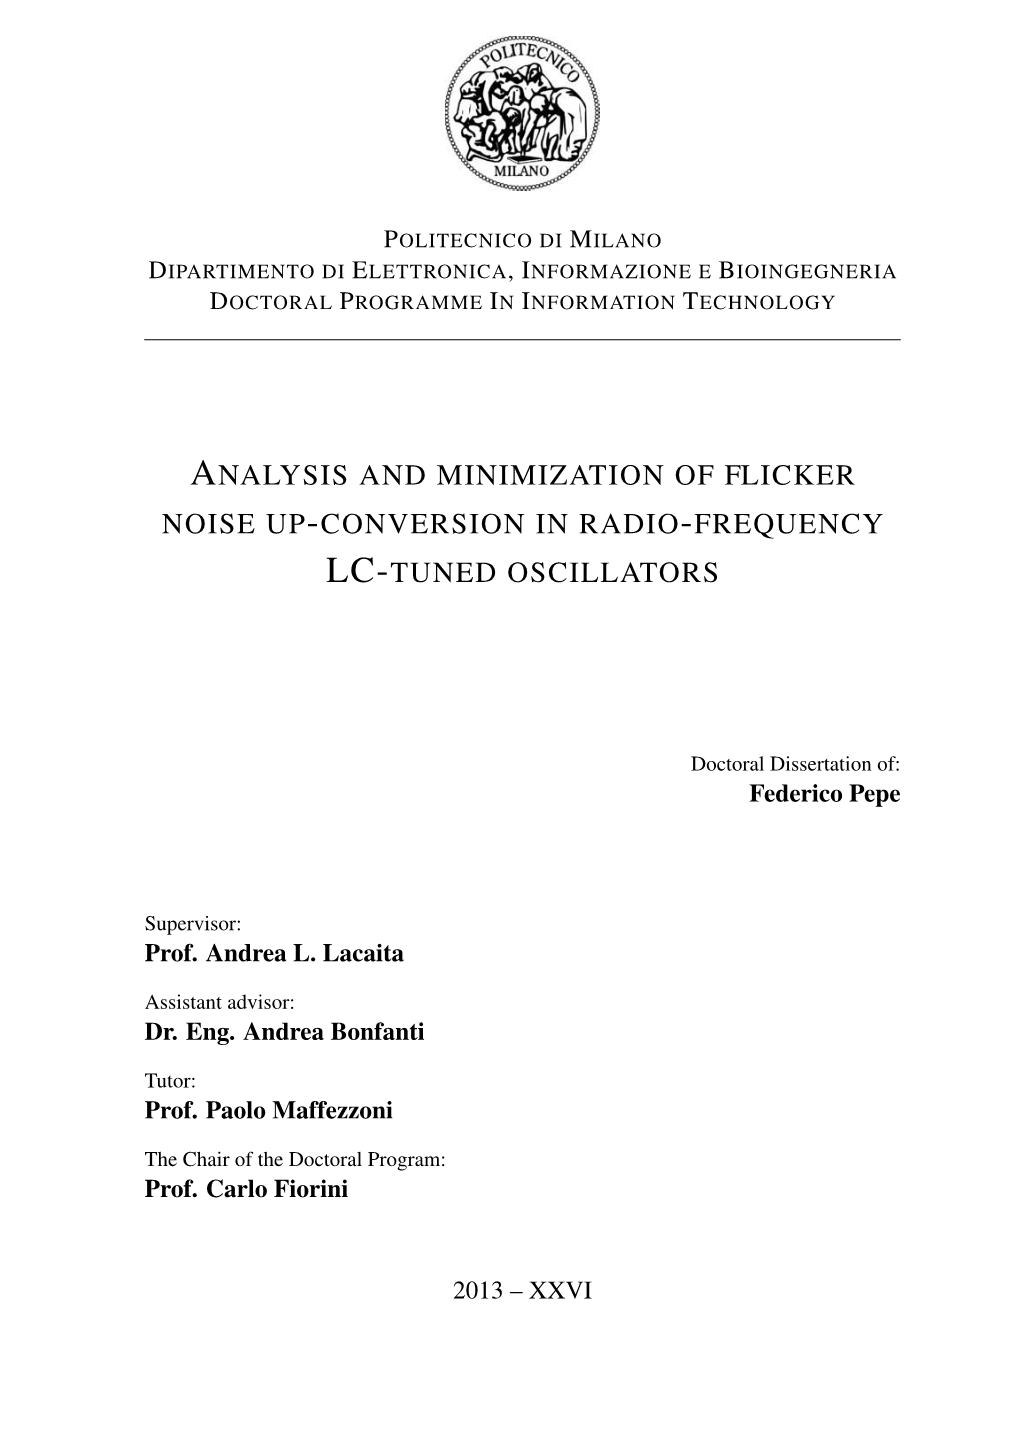 Analysis and Minimization of Flicker Noise Up